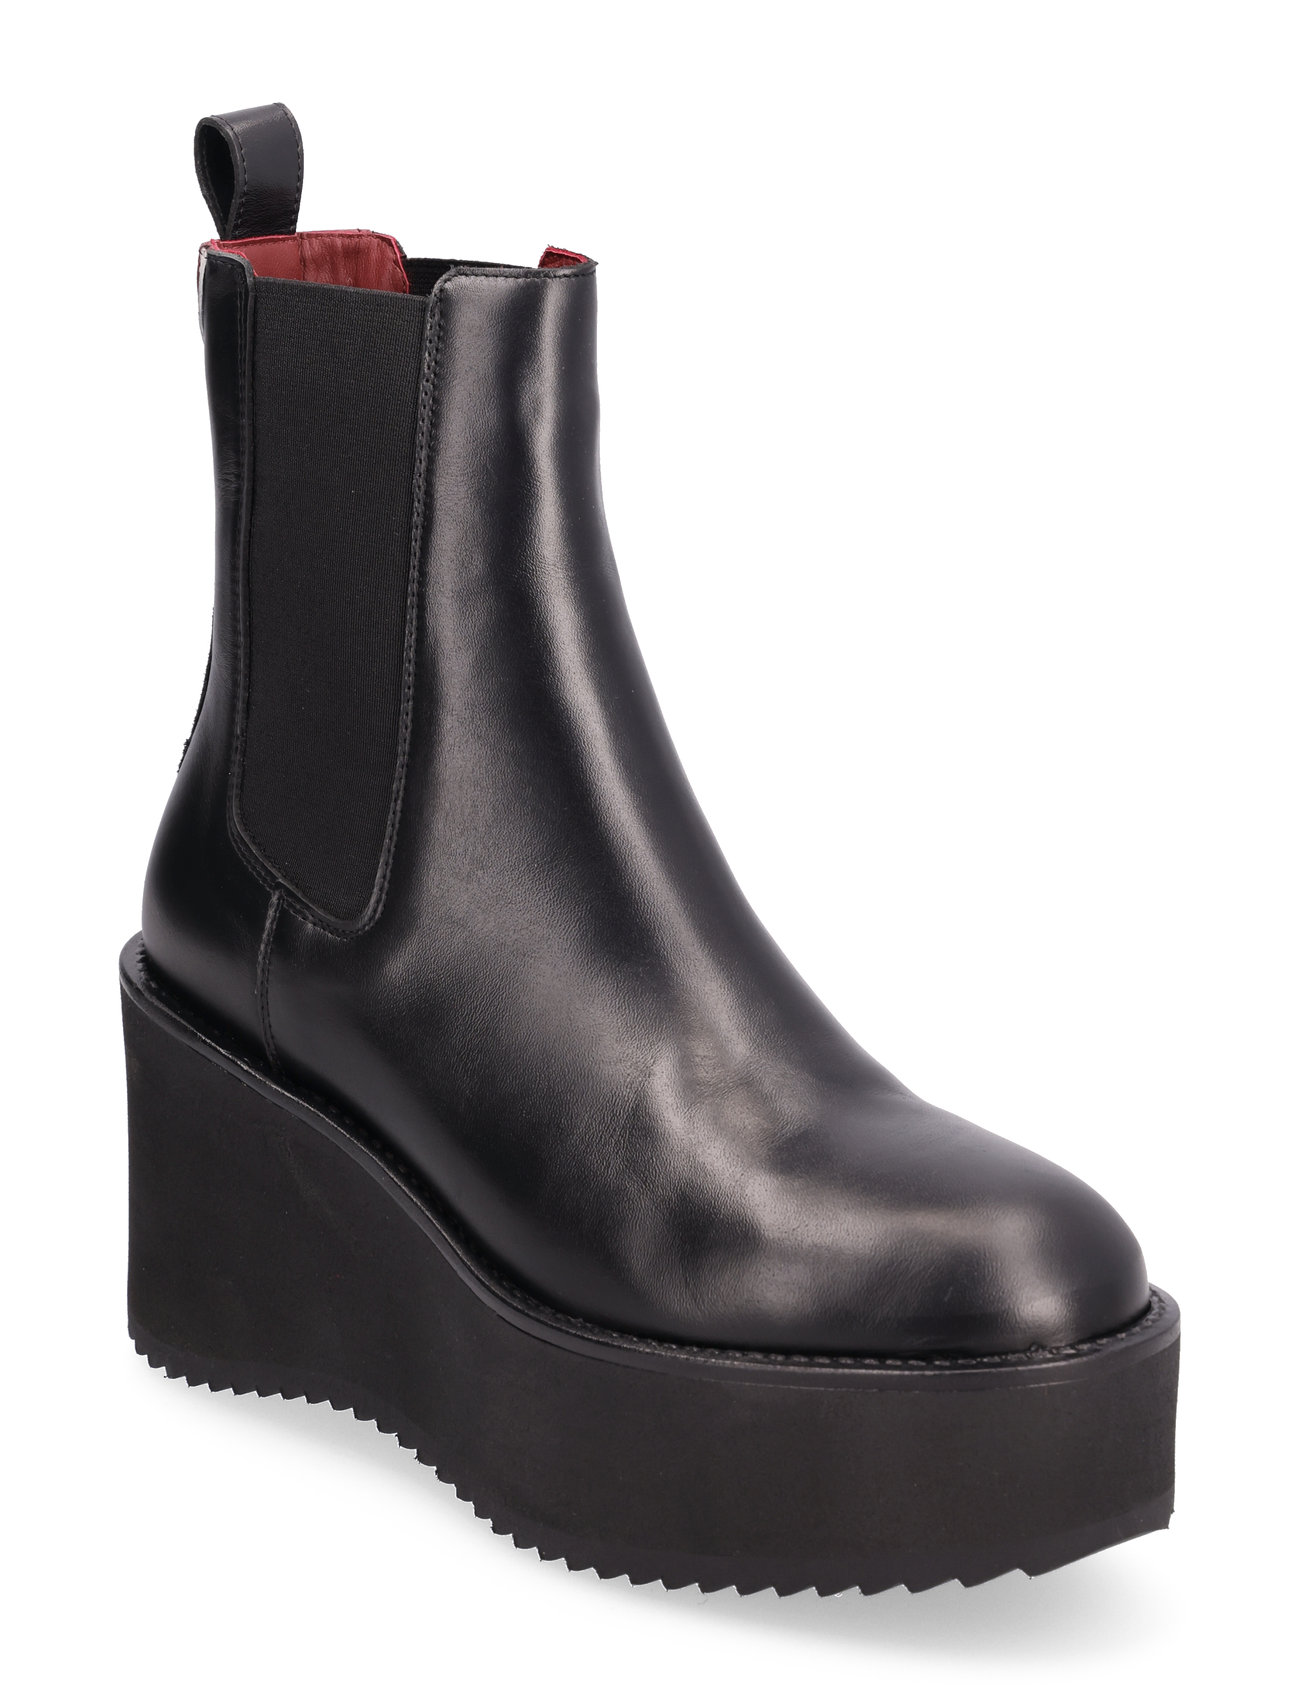 Elevated Wedge Bootie Shoes Boots Ankle Boots Ankle Boots With Heel Black Tommy Hilfiger